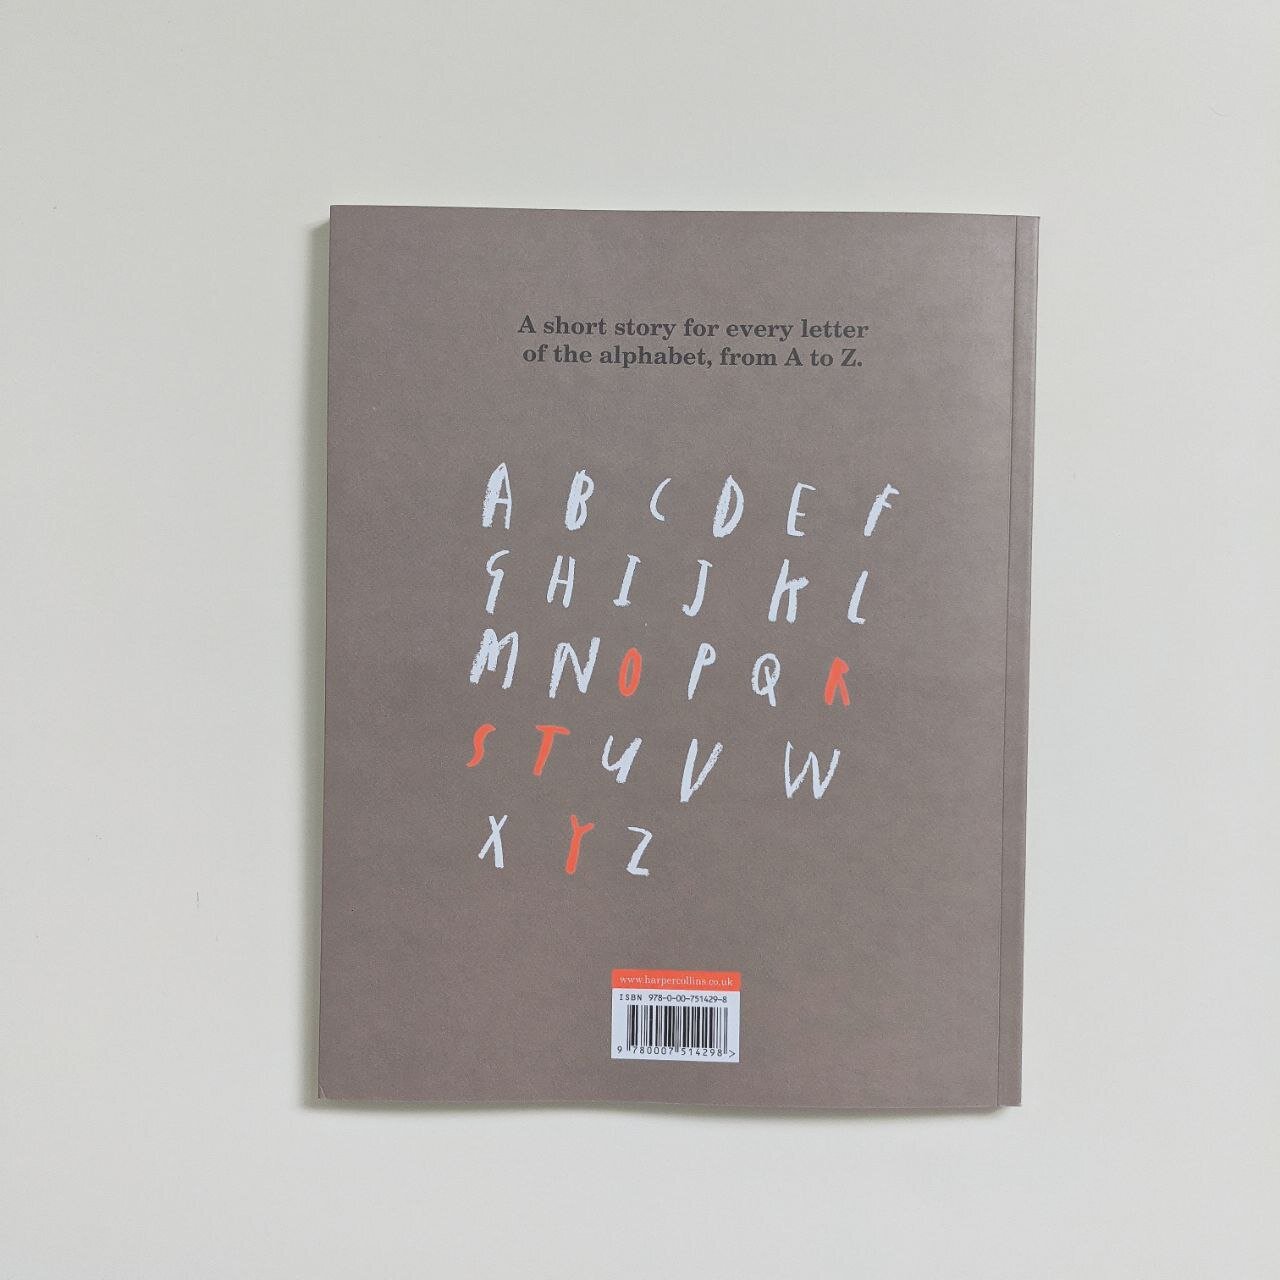 An Alphabet of Stories by Oliver Jeffers